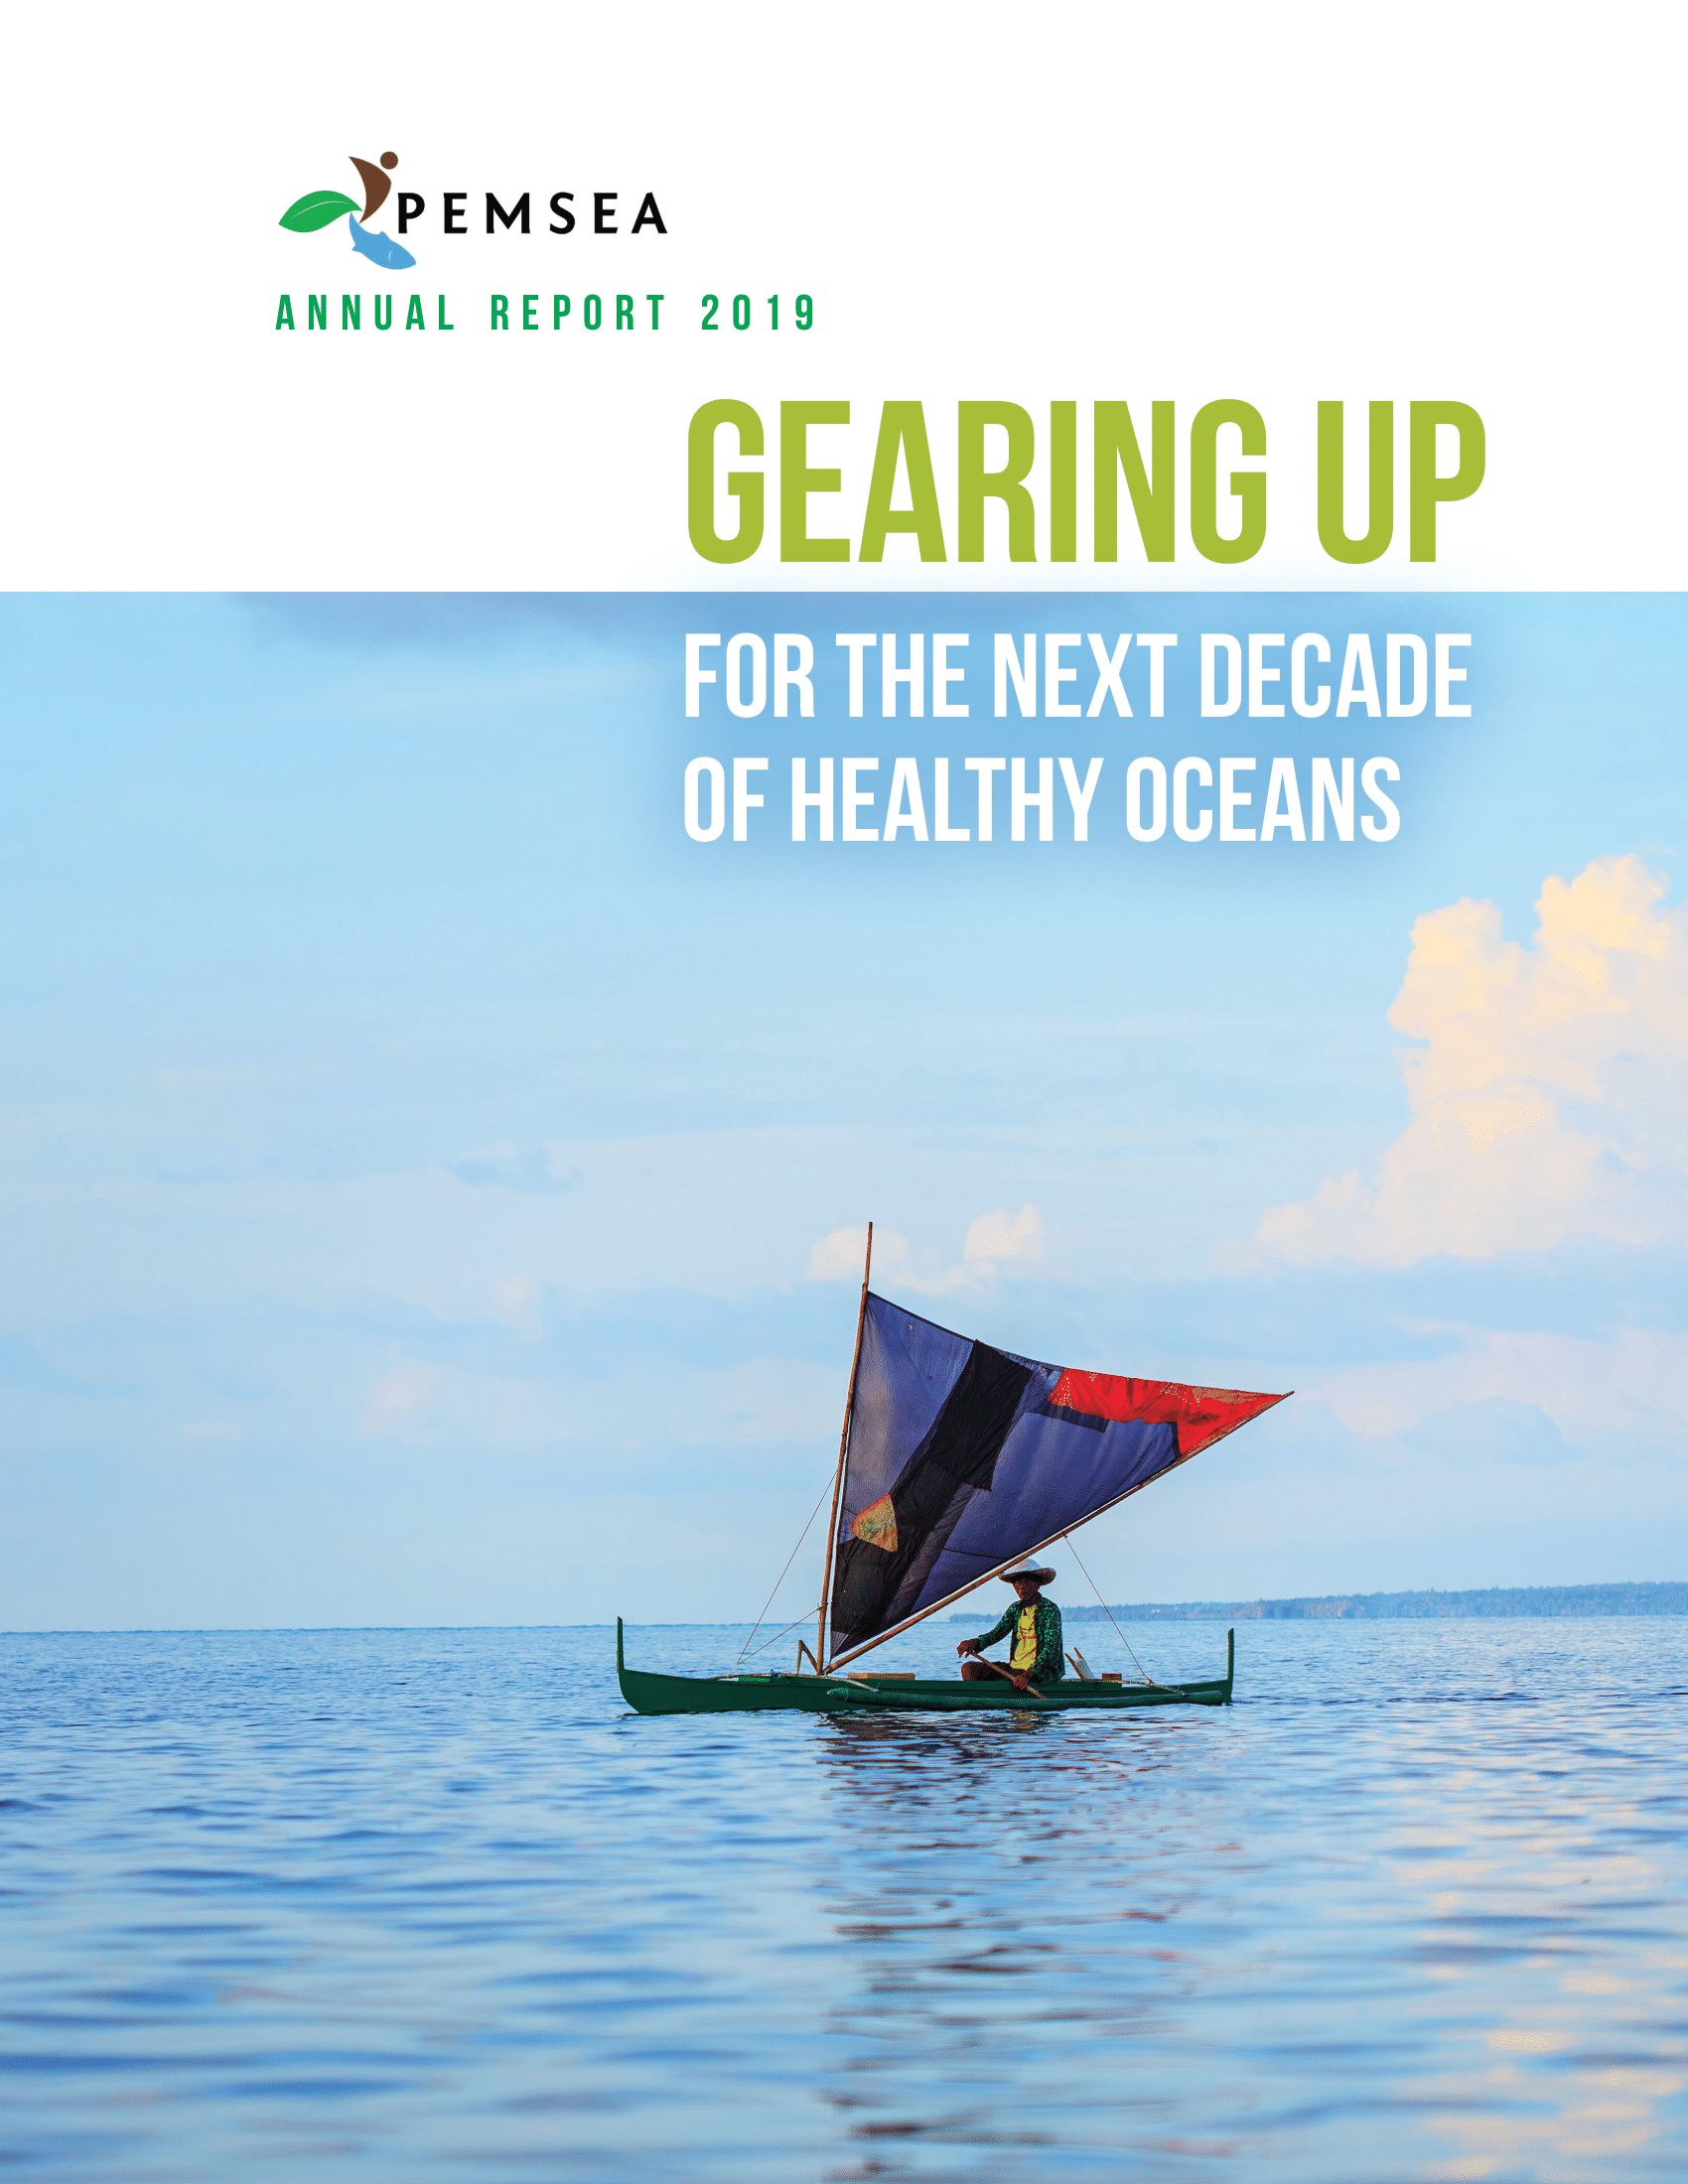 PEMSEA Annual Report 2019: Gearing up for the next decade of healthy oceans